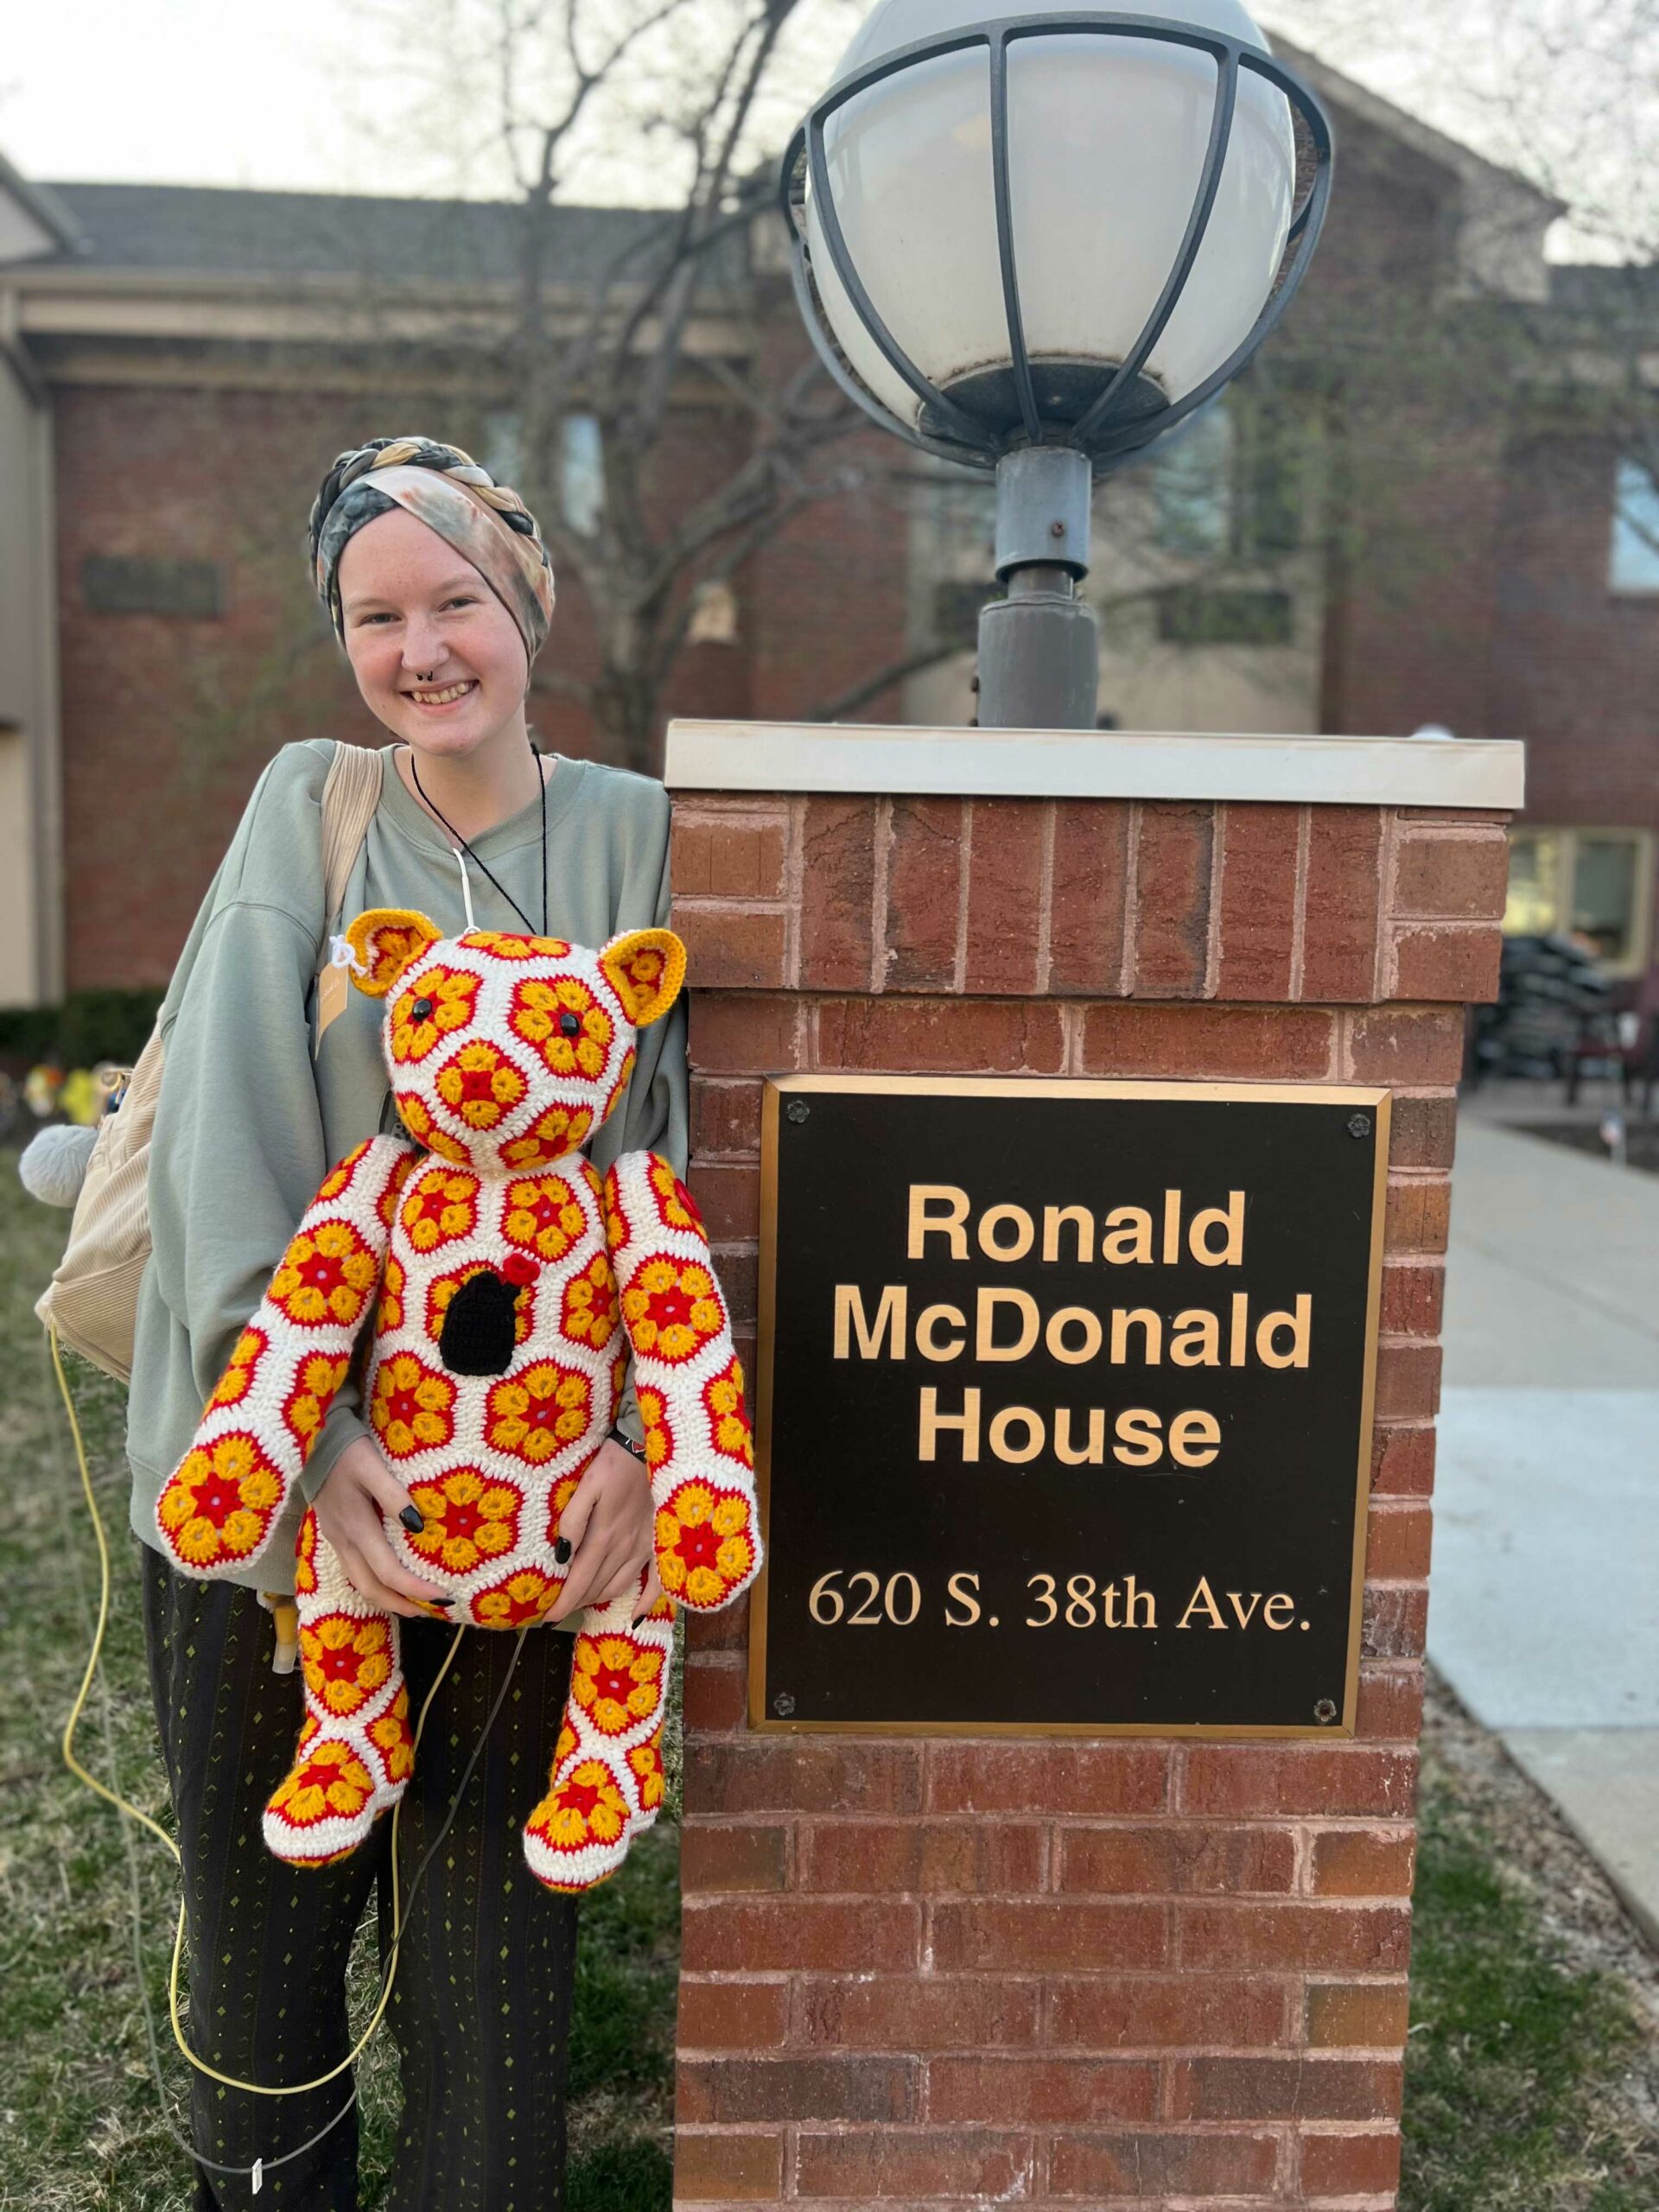 Allison Winter standing next to the Ronald McDonald House sign holding a bear she crocheted